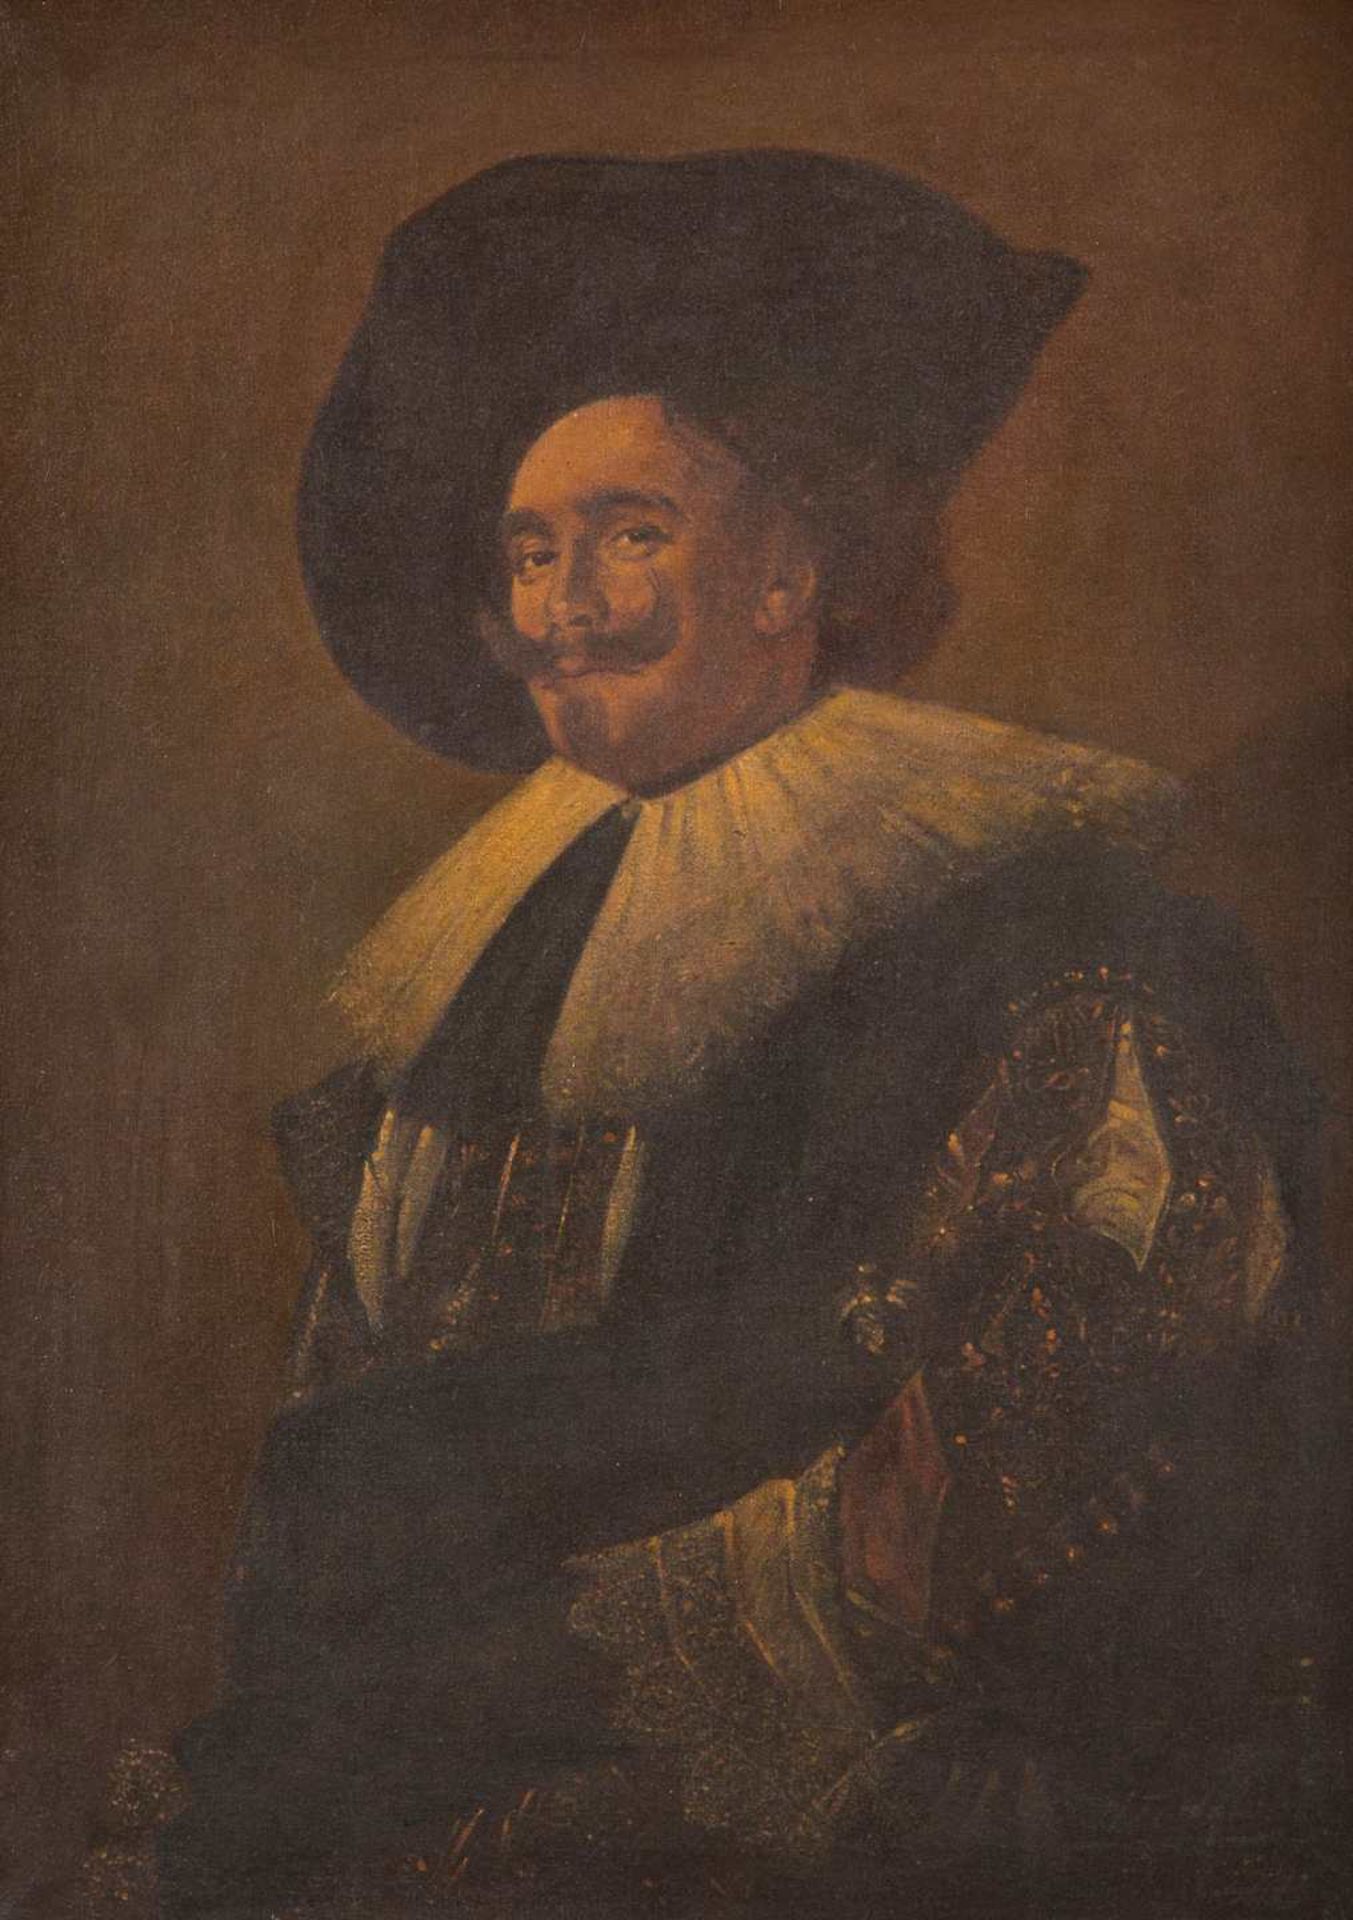 FRANS HALS (FOLLOWER OF THE 19TH CENTURY)